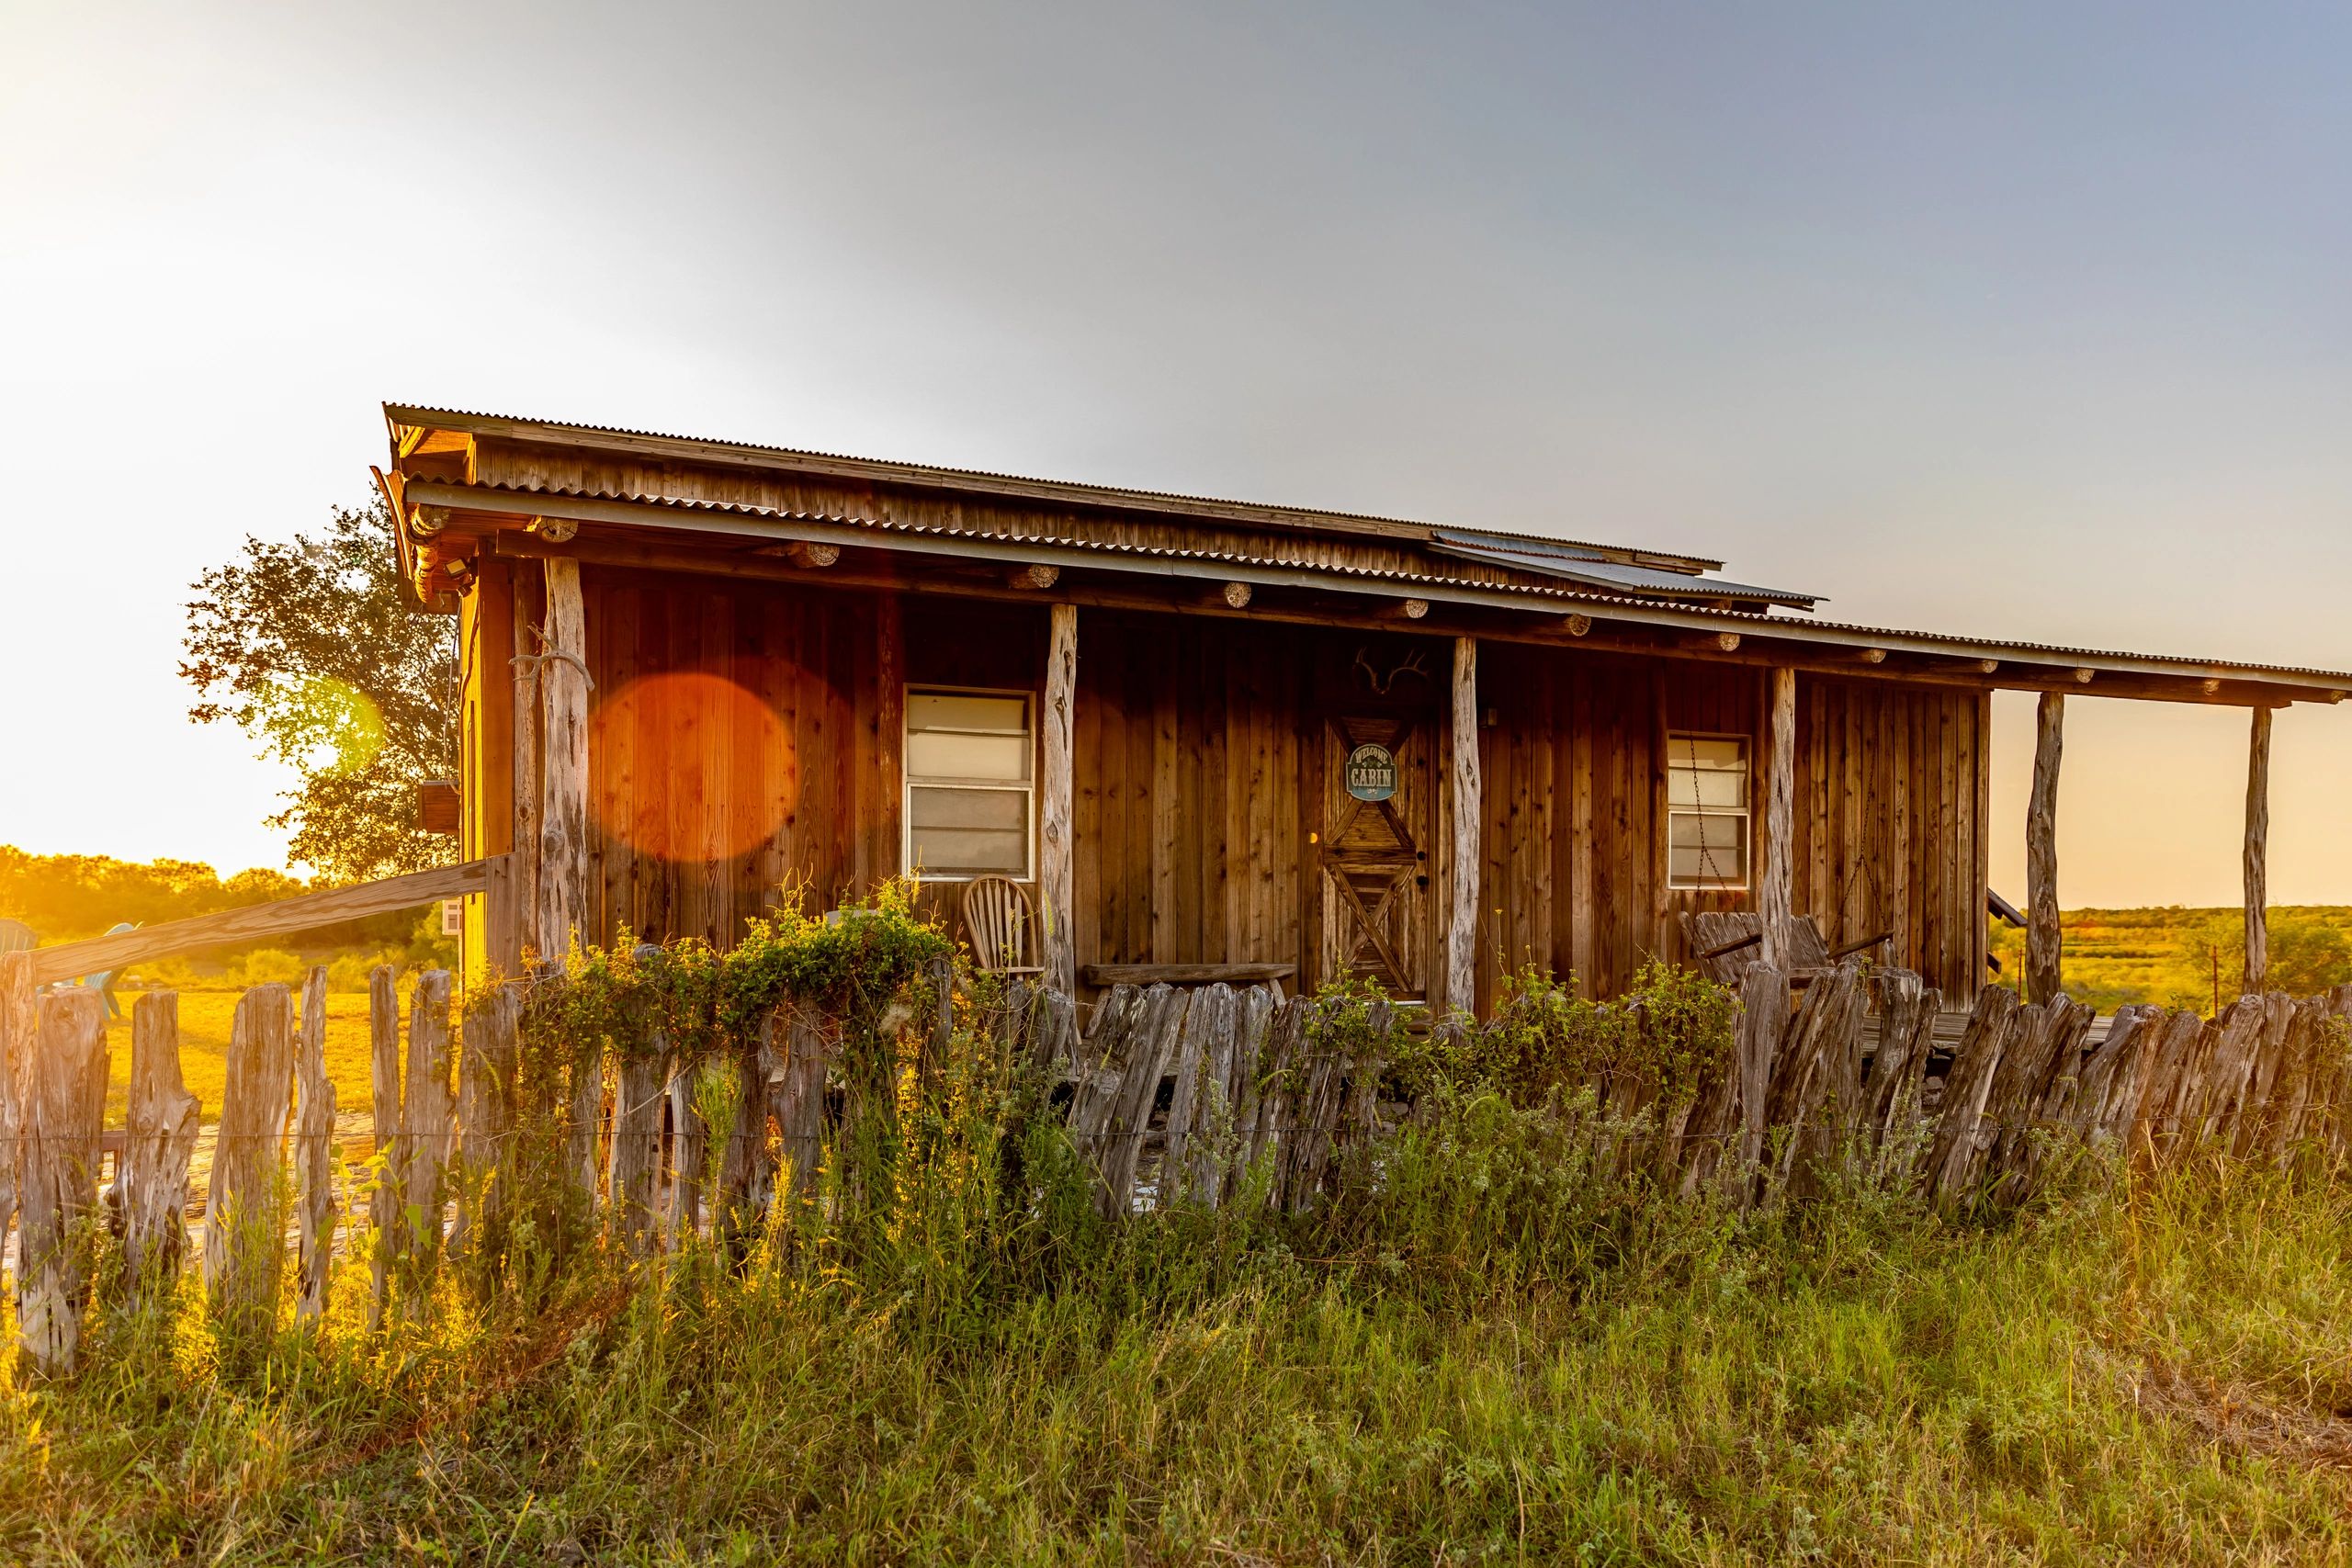 This is an image of the Hindes Ranch Hunting lodge.